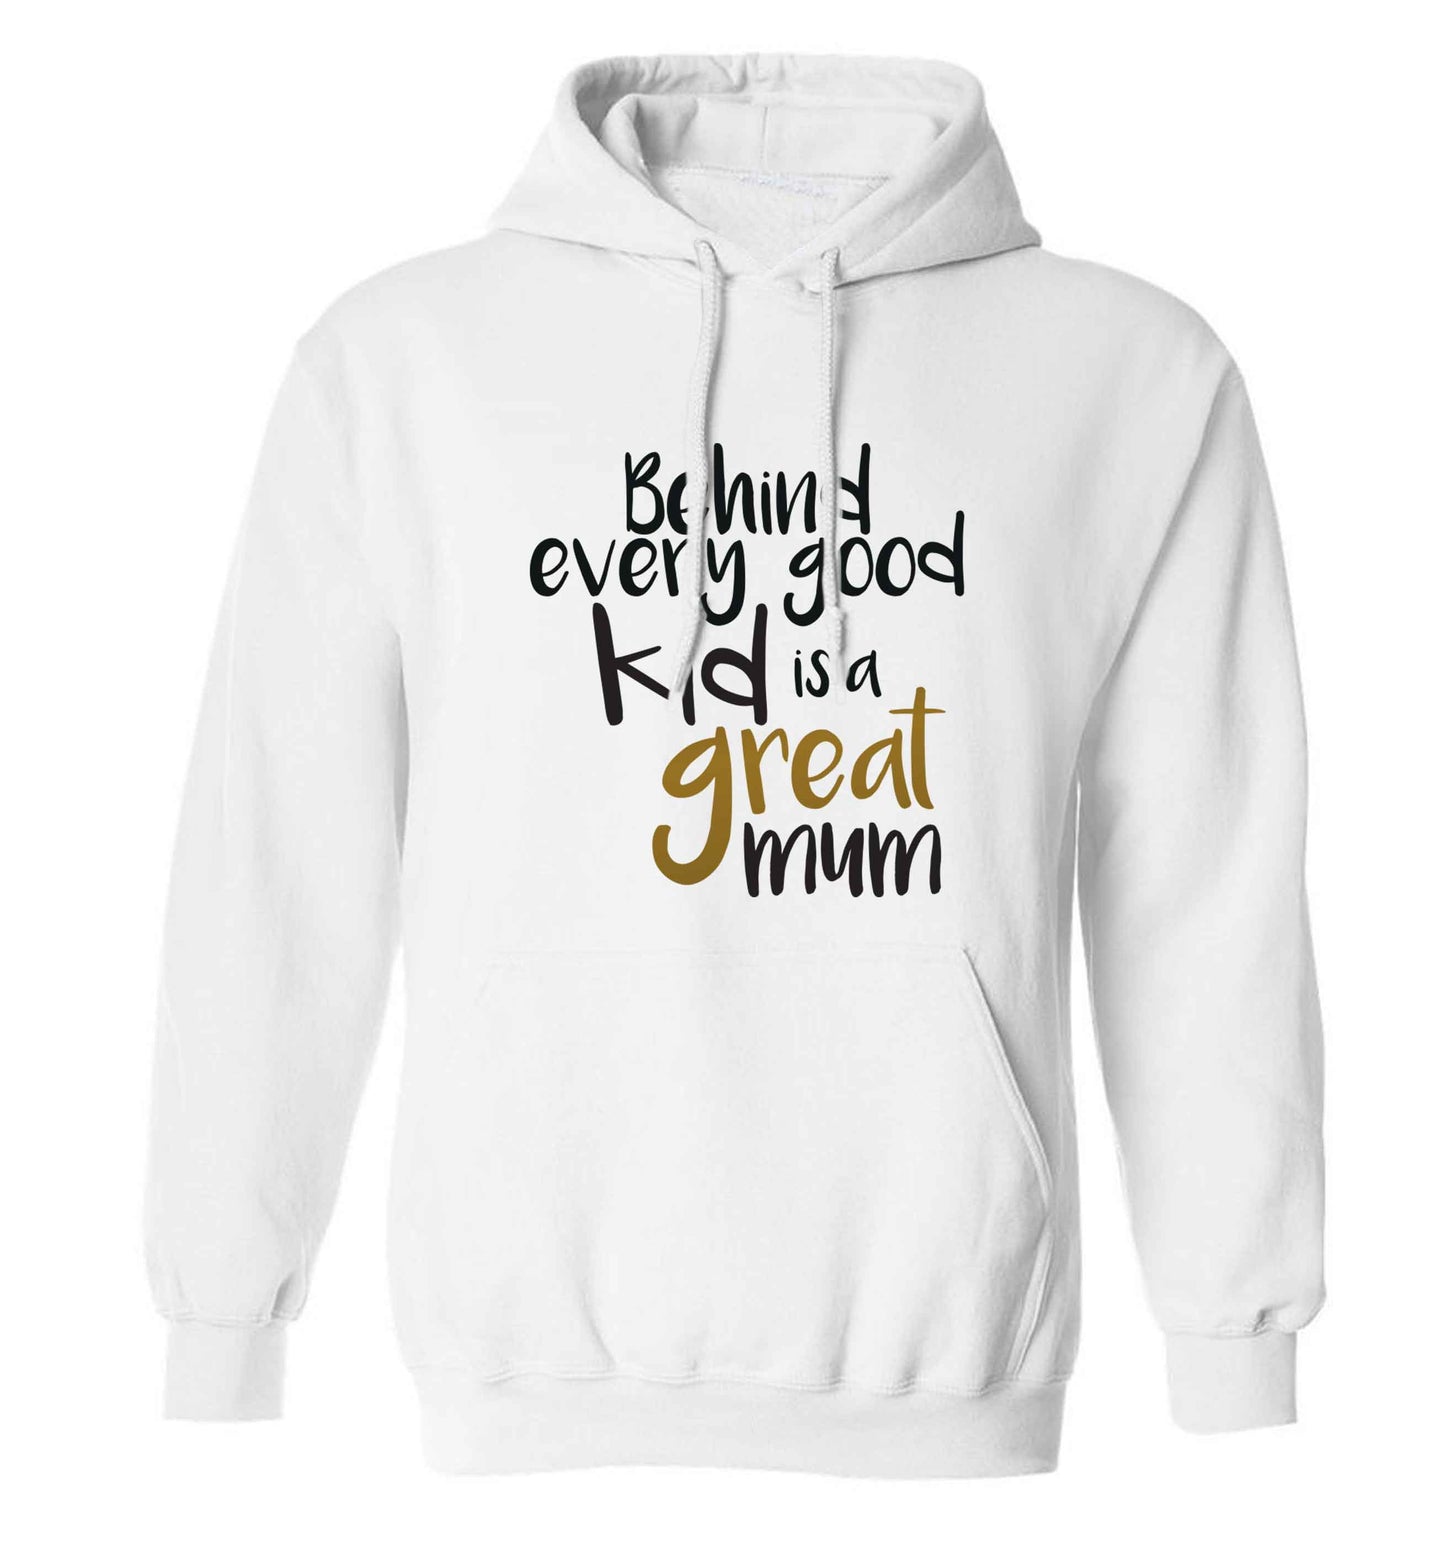 Behind every good kid is a great mum adults unisex white hoodie 2XL